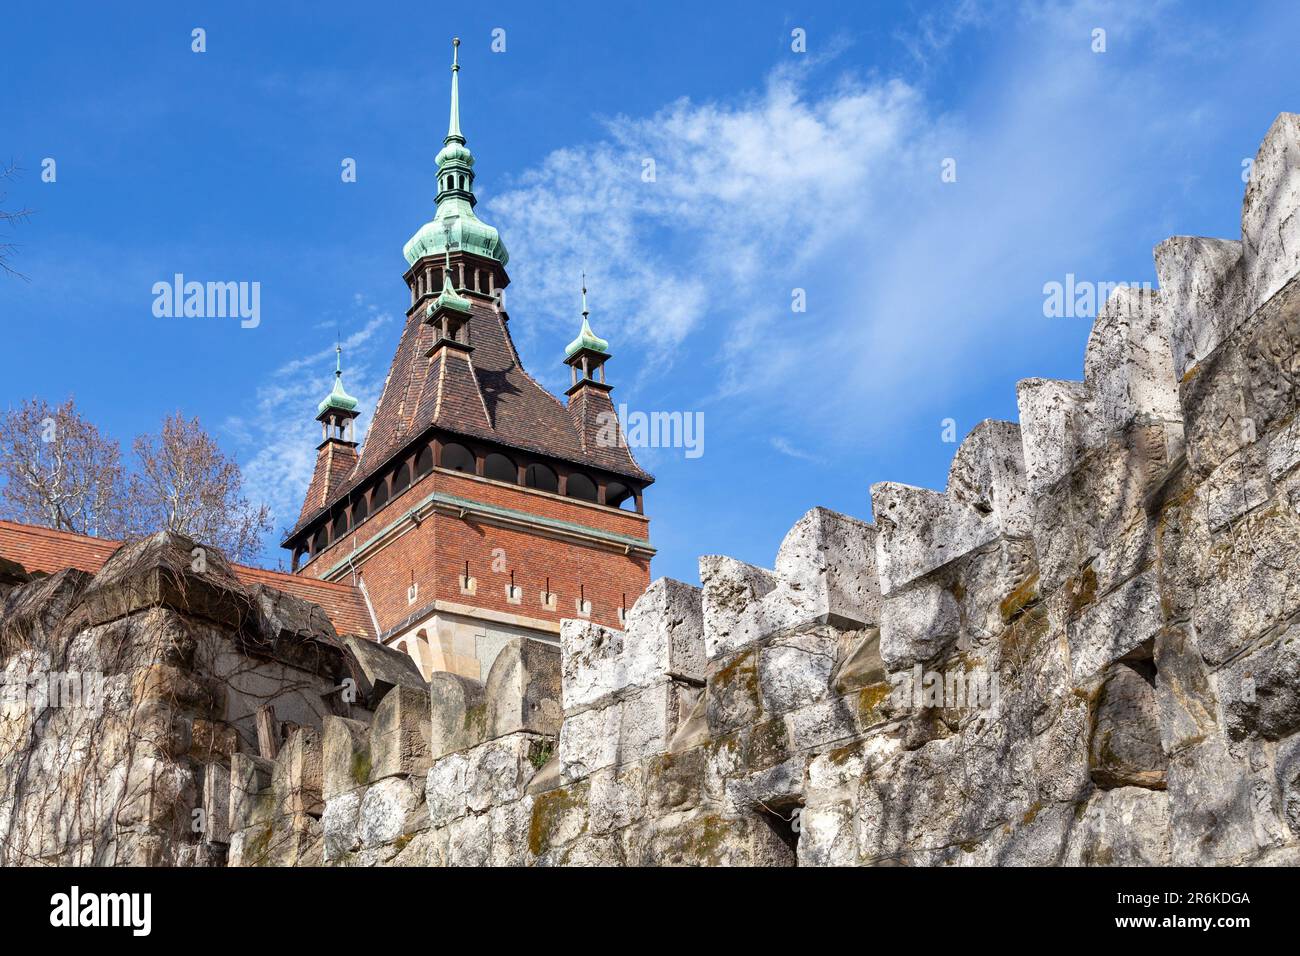 BUDAPEST, HUNGARY - MARTH 13, 2023: These are walls and towers of the Vajdahunyad Castle, an eclectic building in the Varosliget park. Stock Photo